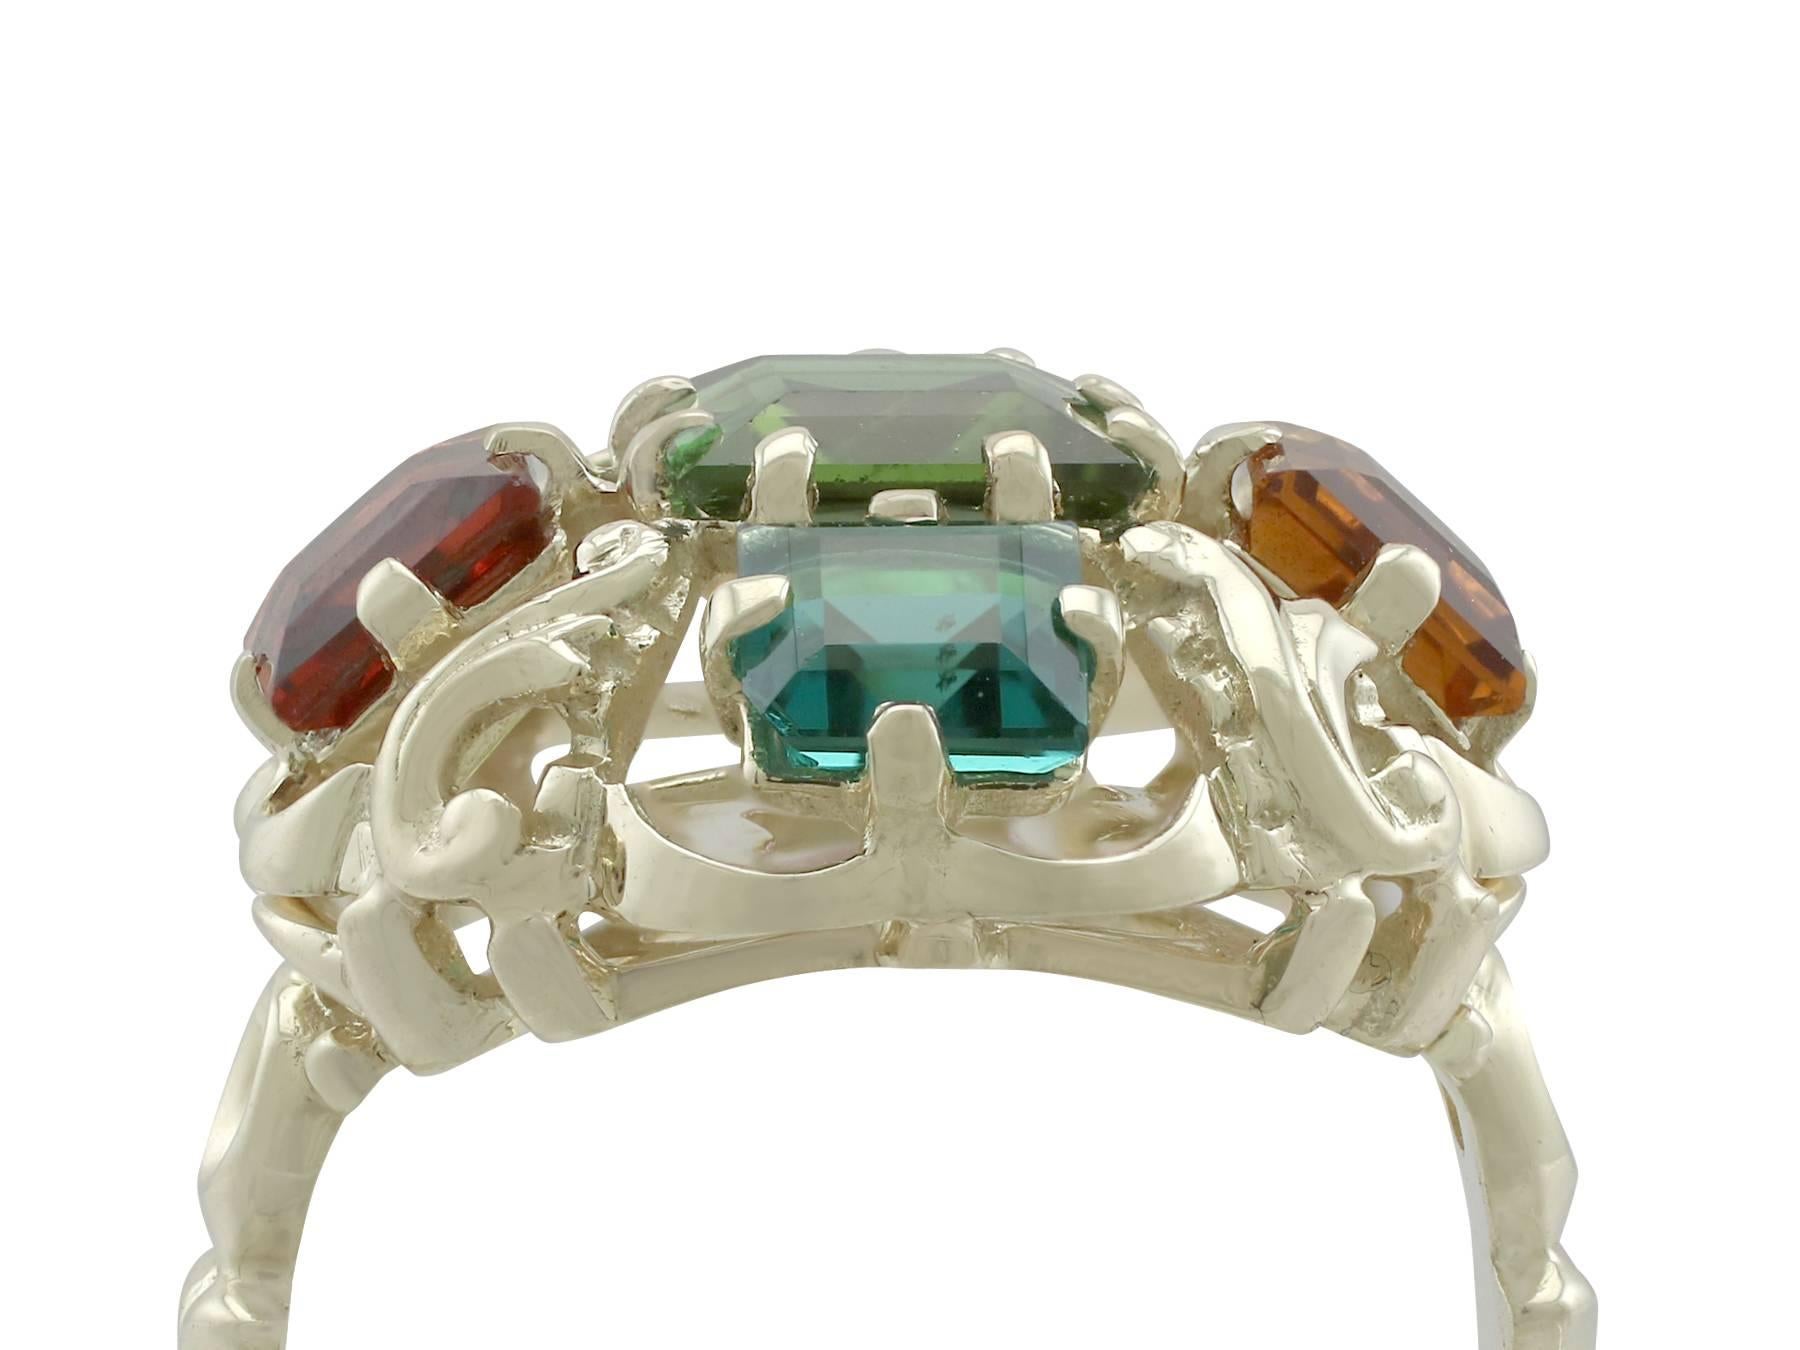 A 1.30 carat peridot, 0.74 carat citrine, 0.88 carat garnet, 0.62 carat amethyst, 0.66 carat tourmaline and 14 karat yellow gold cocktail ring; part of our diverse vintage jewelry collections.

This fine and impressive multi gemstone ring has been